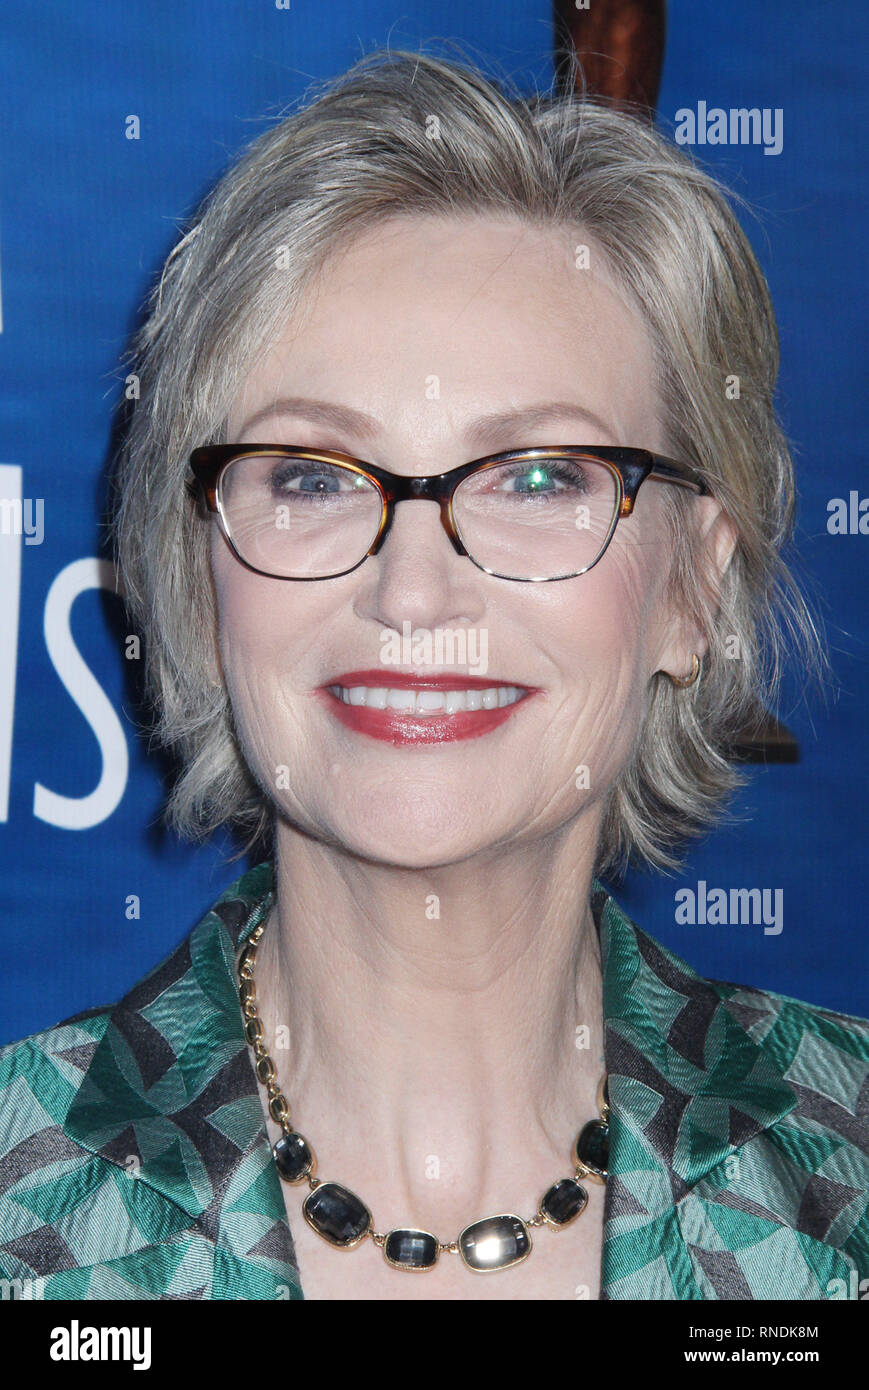 Jane Lynch  02/17/2019 2019 Writers Guild Awards held at The Beverly Hilton in Beverly Hills, CA Photo by Izumi Hasegawa / HNW / PictureLux Stock Photo